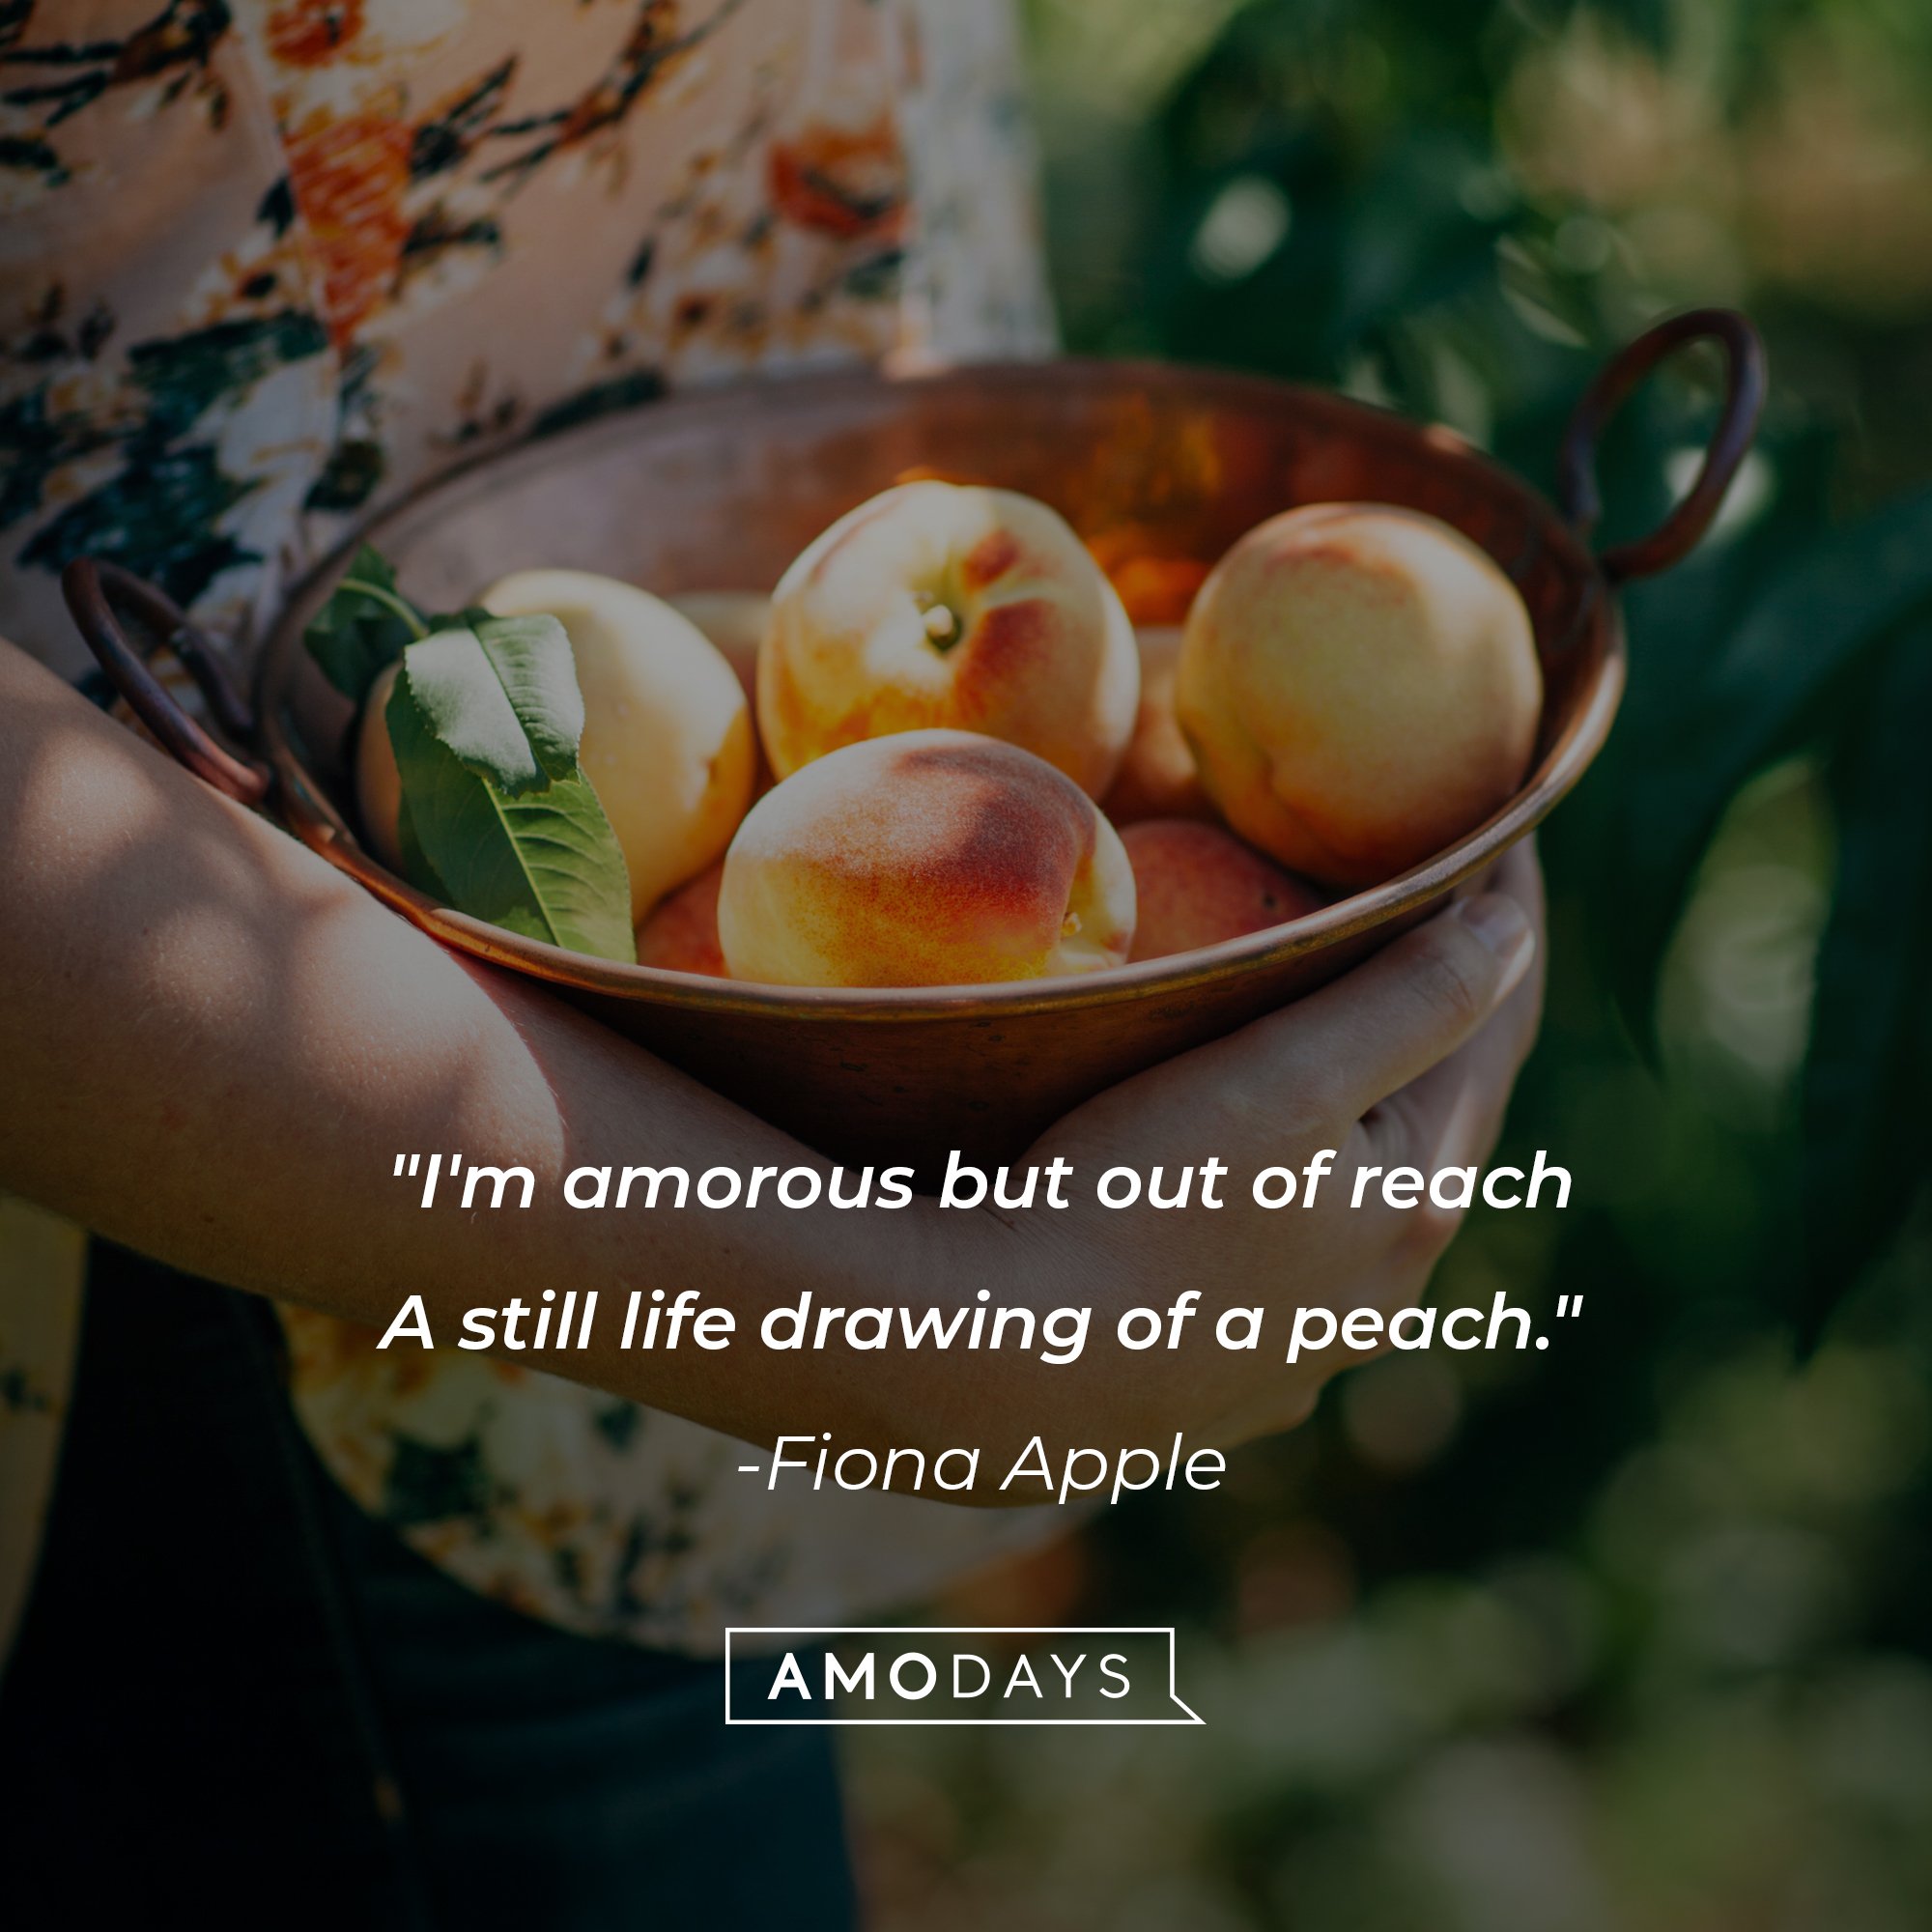 Fiona Apple's quote: "I'm amorous but out of reach / A still life drawing of a peach." | Image: AmoDays